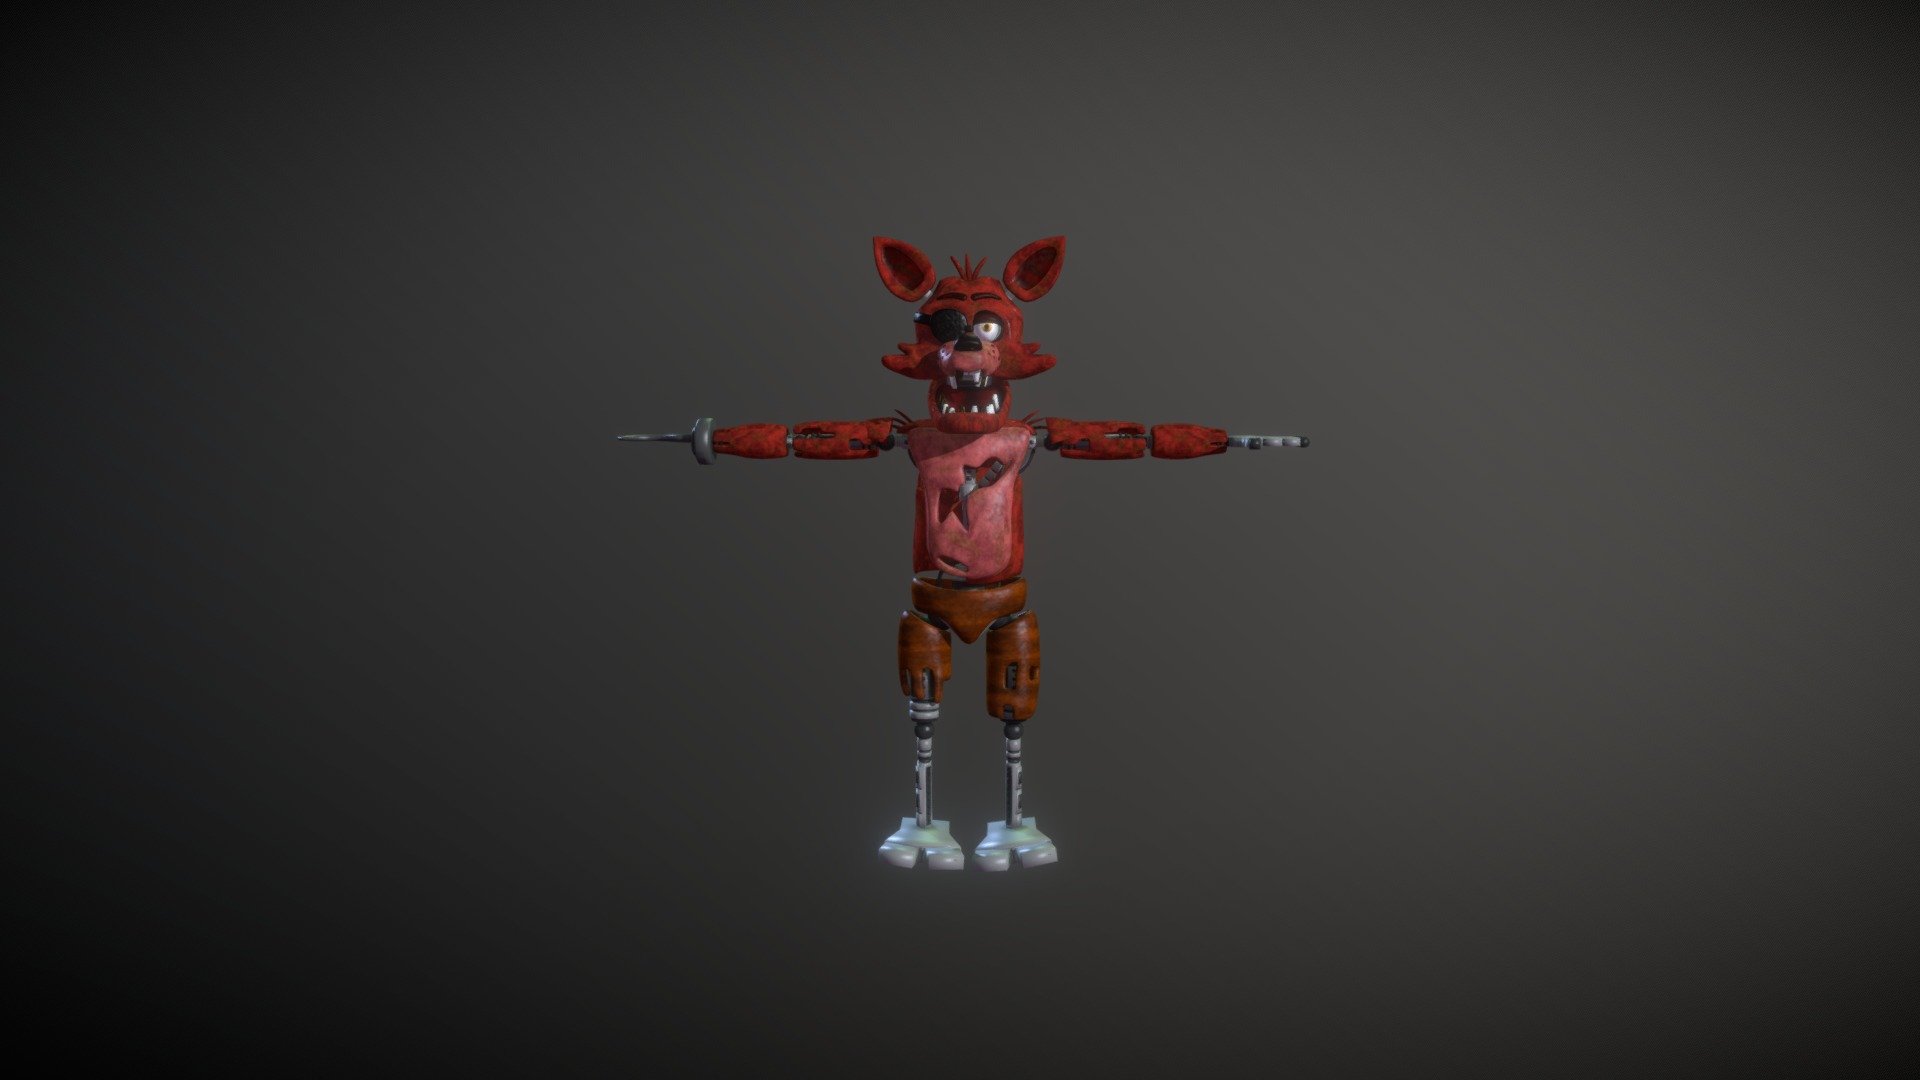 Foxy Fnaf Rynfox Download Free 3d Model By Dillonxtrullier 21 Dillonxtrullier 21 84f2e04 - roblox fnaf vr help wanted